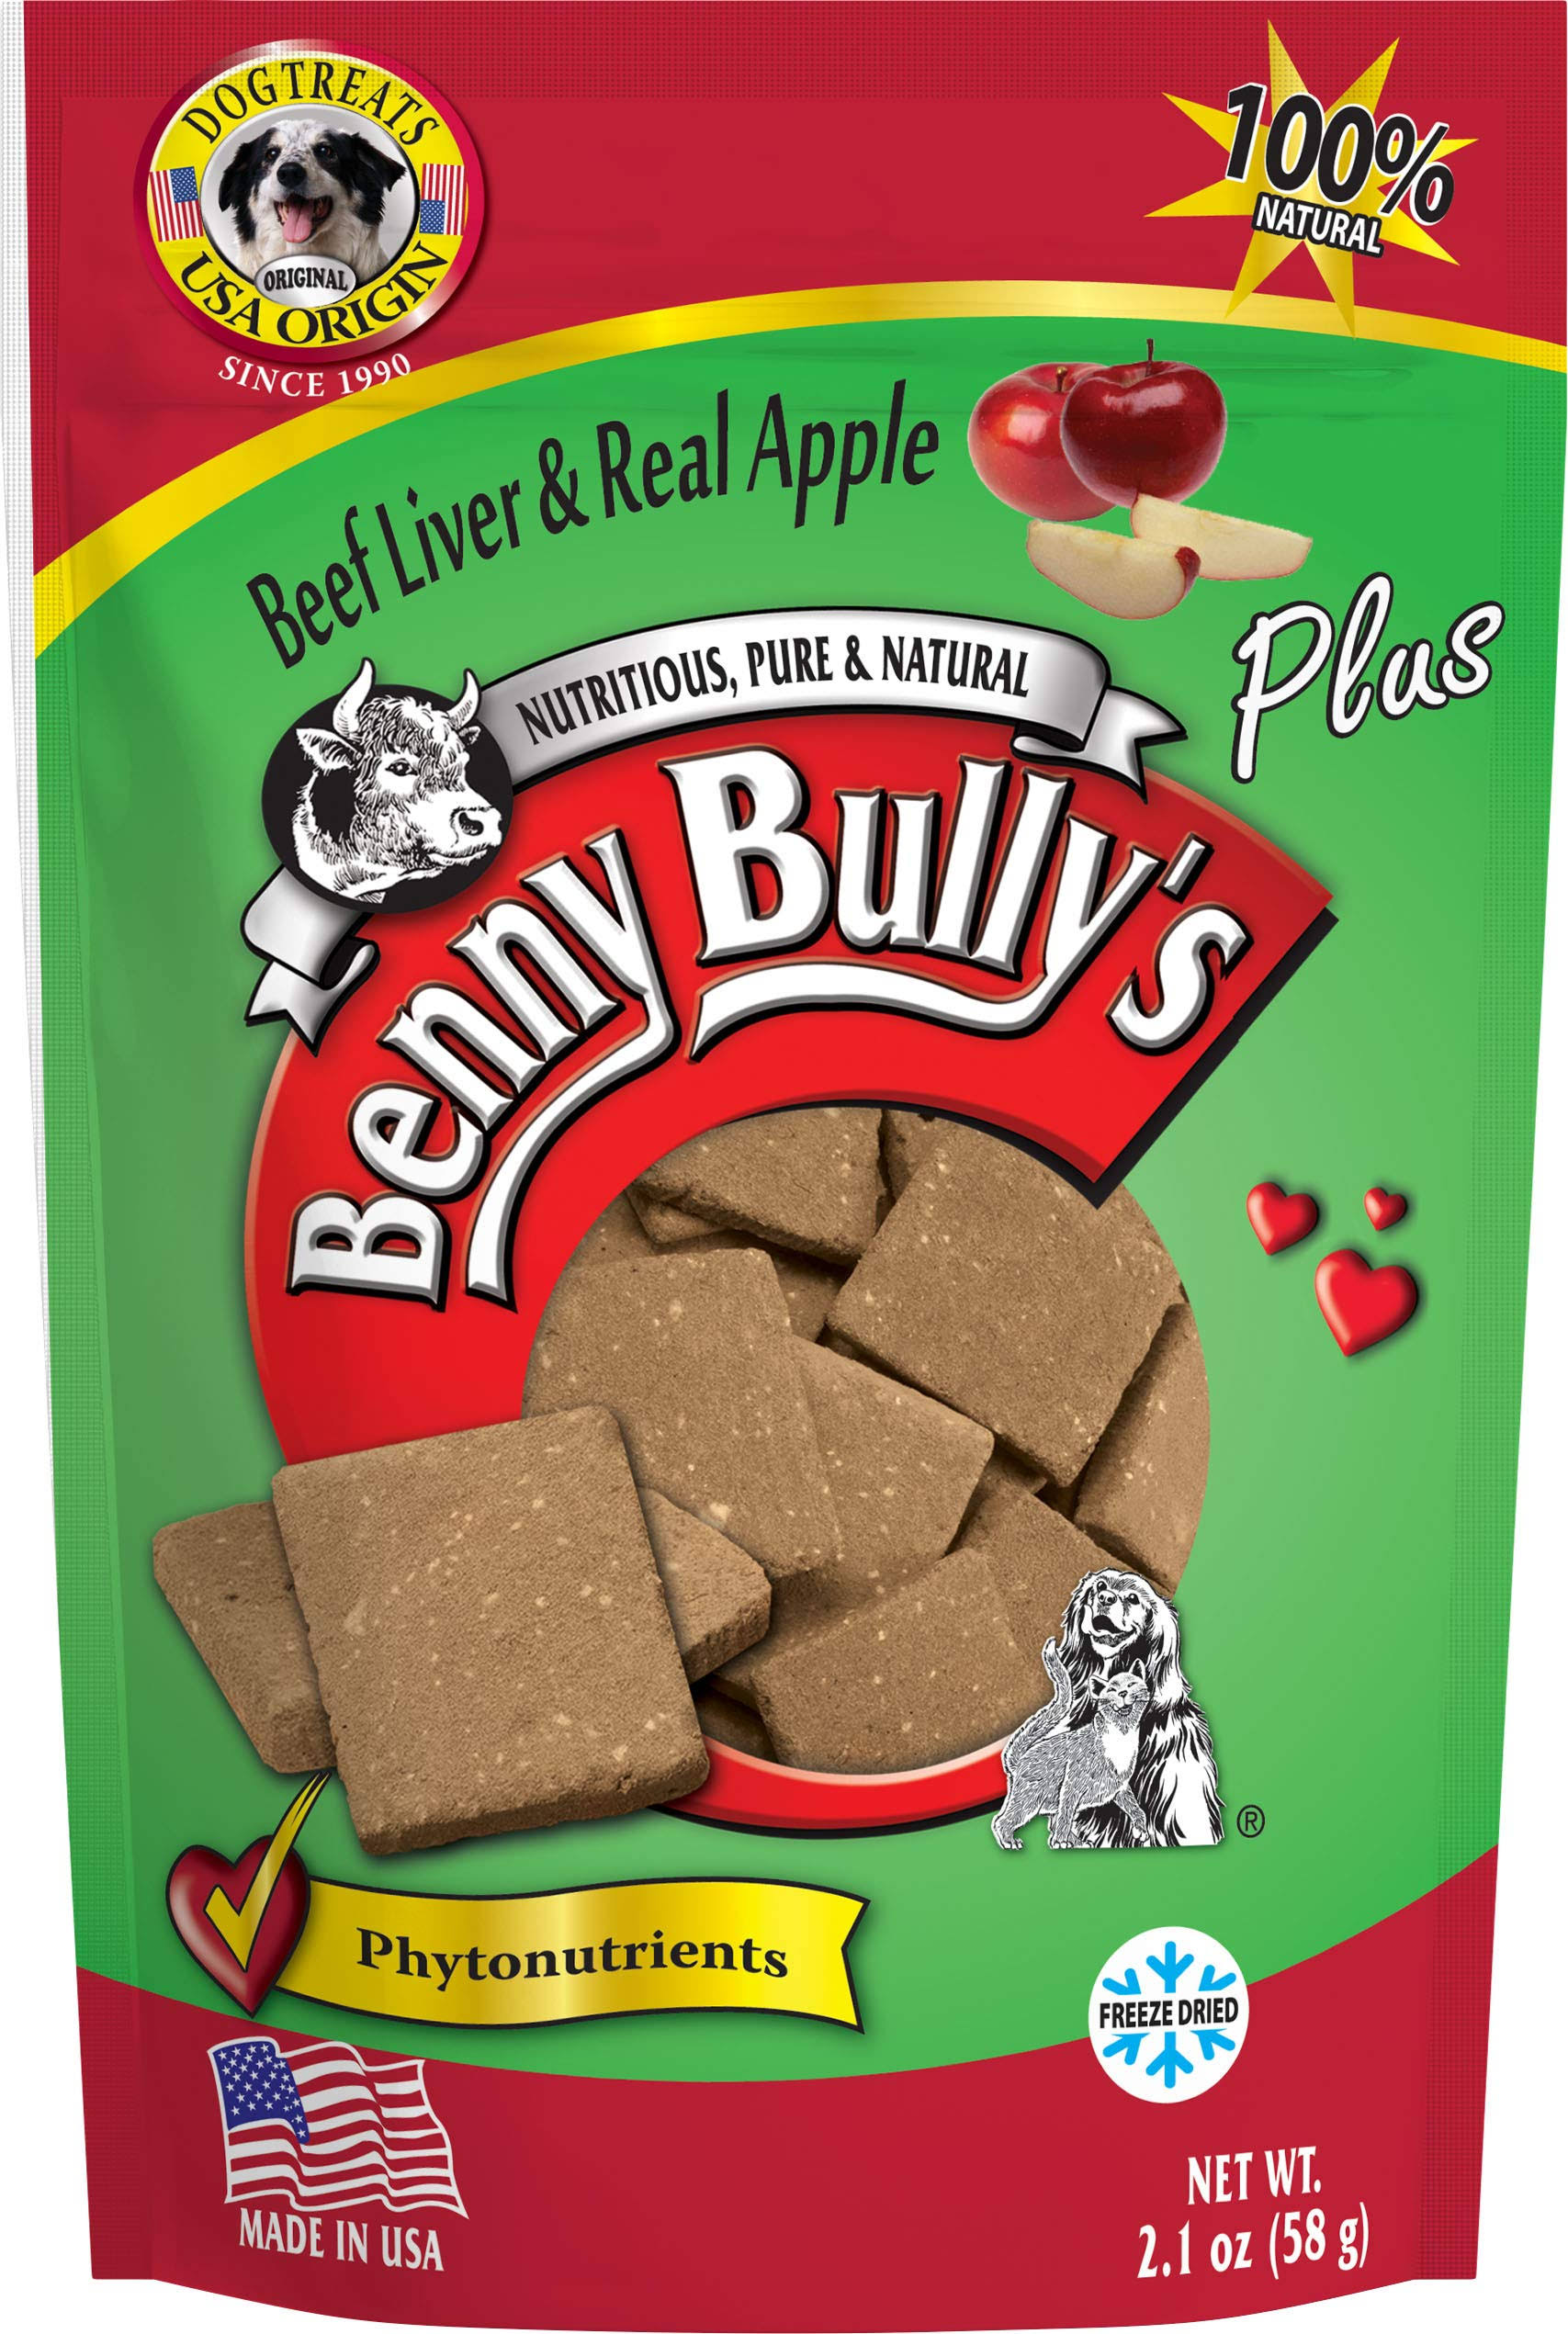 Benny Bully's Plus Apple Dog and Cat Treat - Beef Liver and Real Apple, 2.1oz